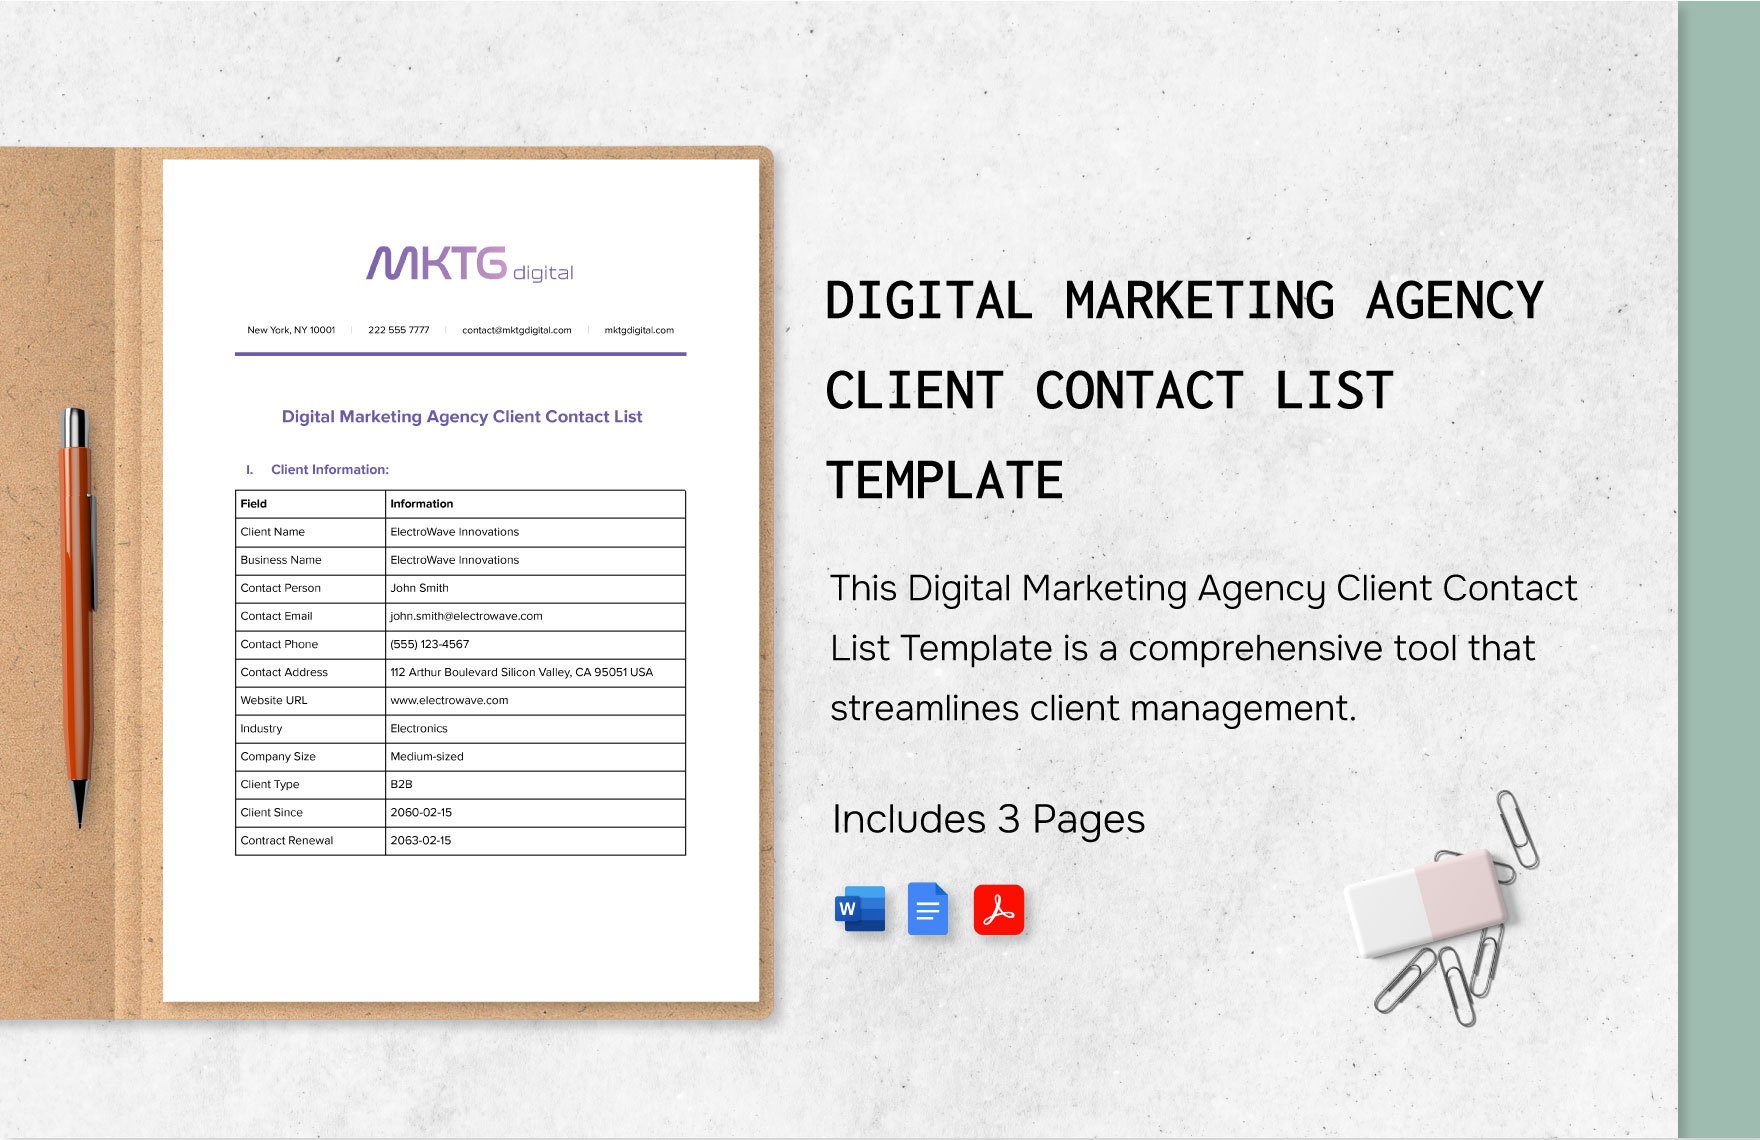 Digital Marketing Agency Client Contact List Template